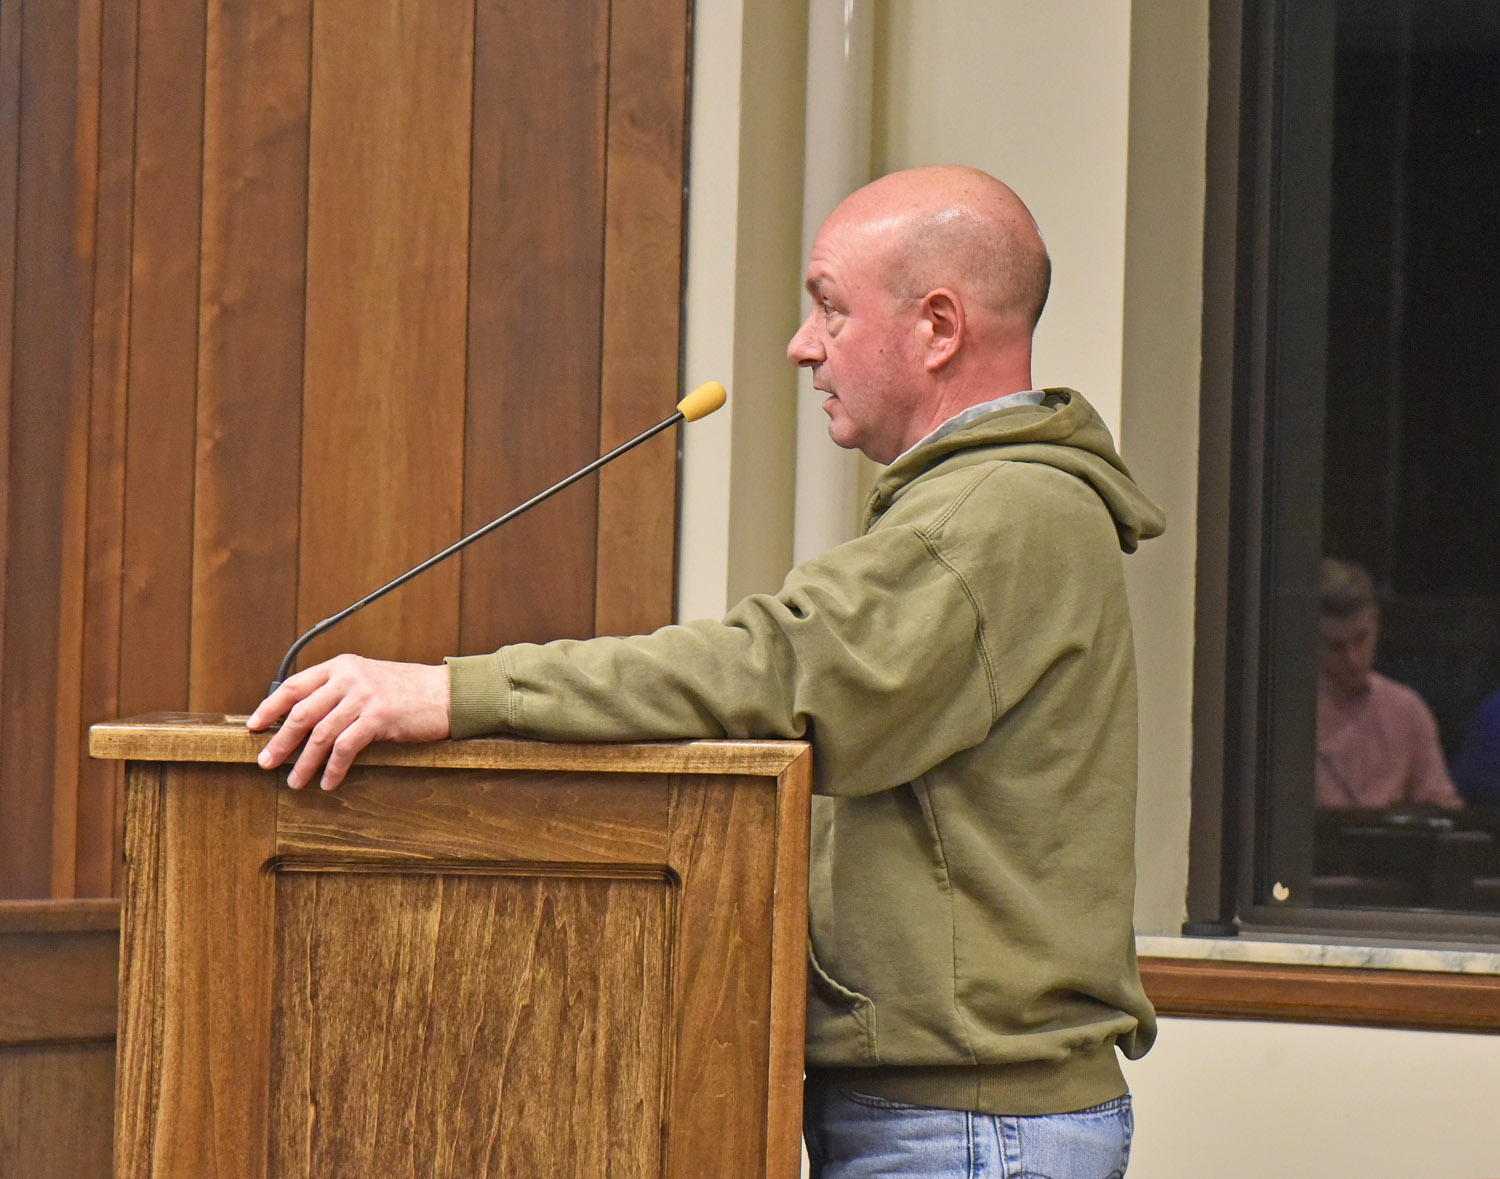 Rob Depaolo, who works in the city's inspection department, addressed the board about issues regarding the city's dog population. The official number of registered dogs is 2,209, which seems low to city officials. Council President Eric Zadzilka suggested a dog census as a first step to addressing and possibly re-vamping some of the city's dog laws.